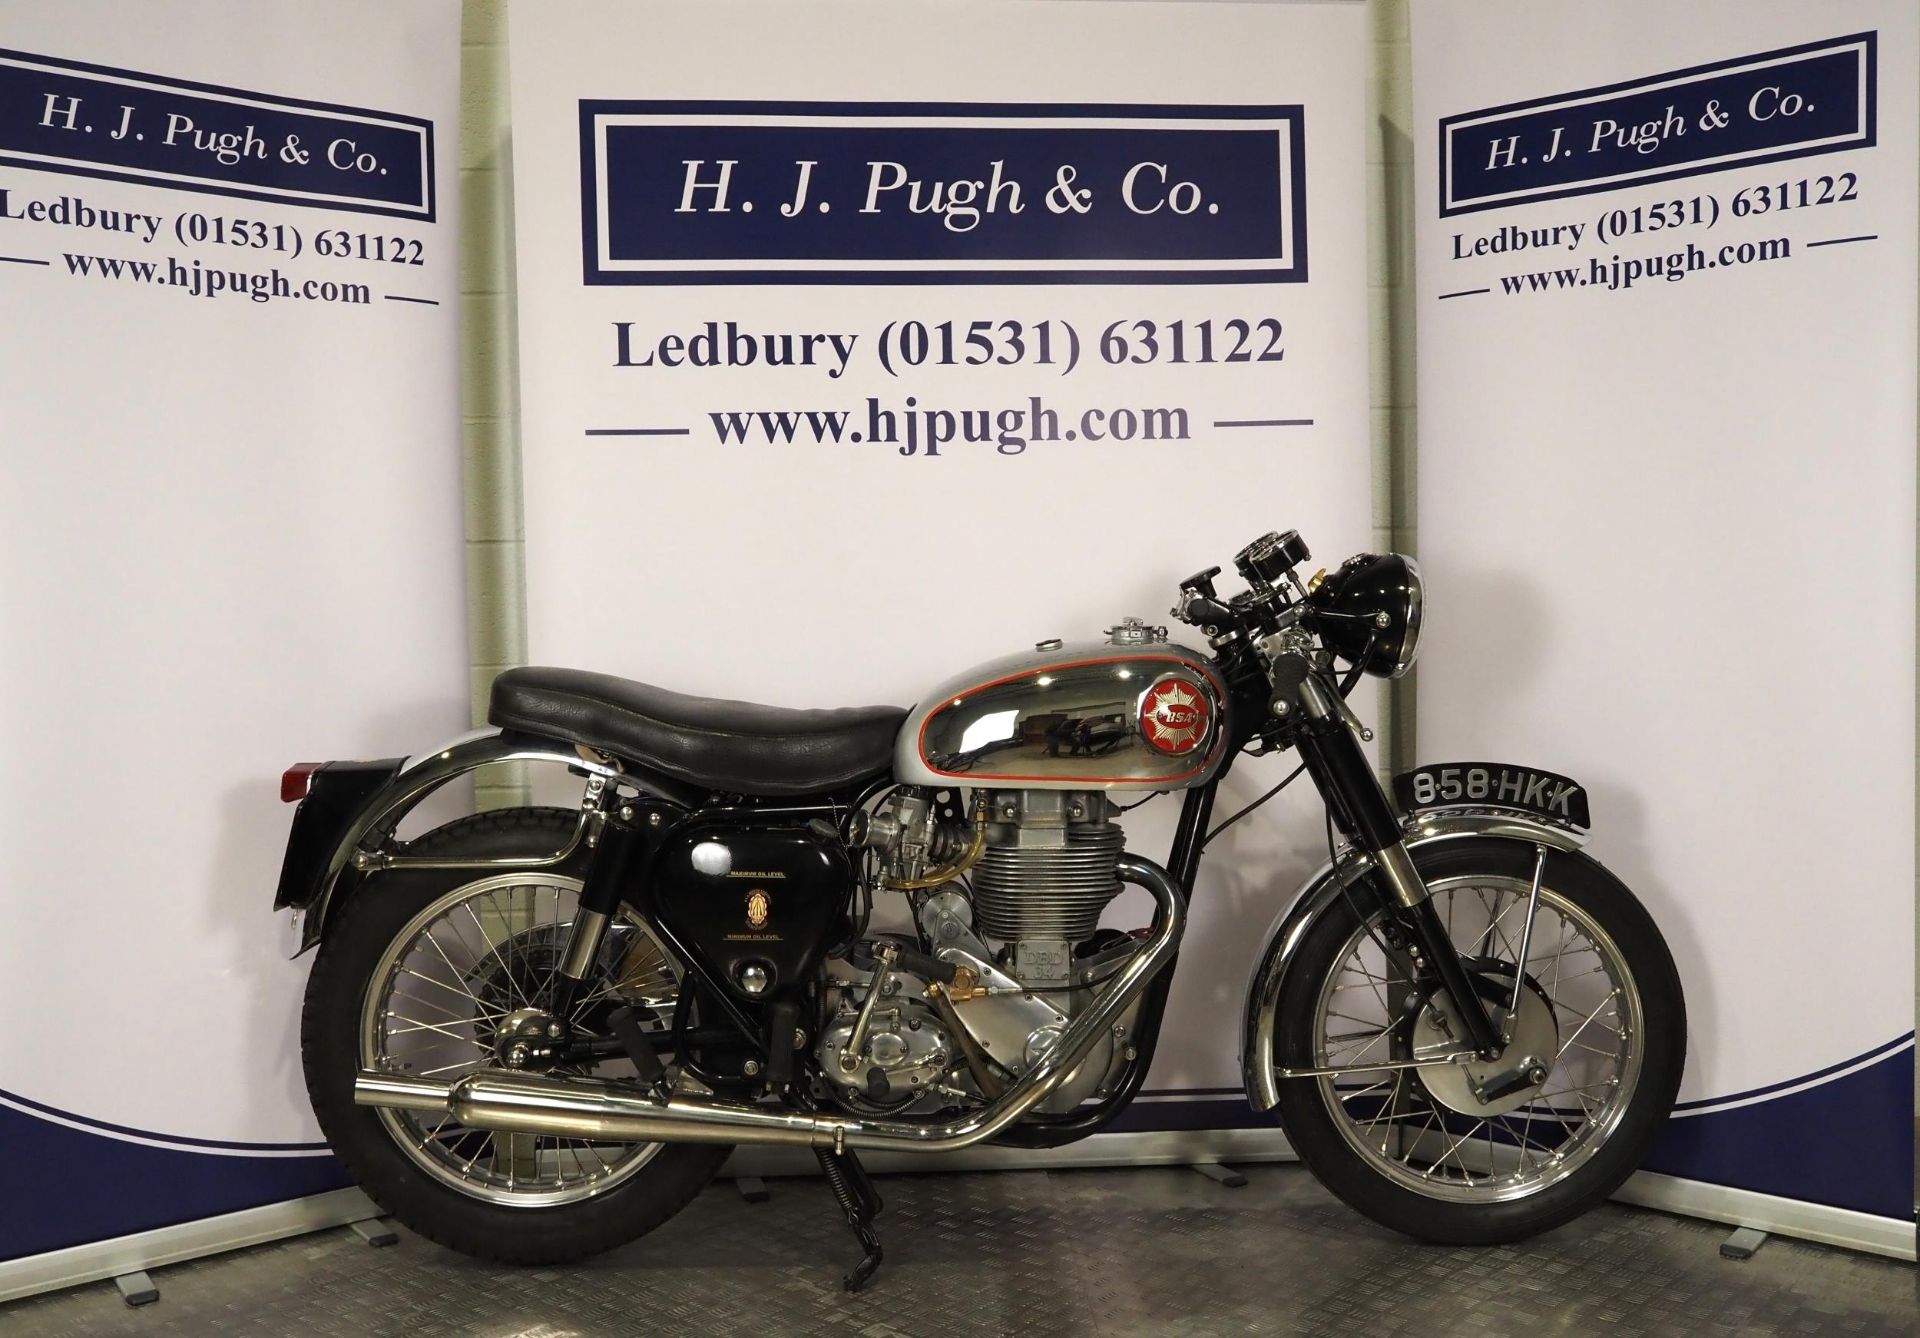 BSA Goldstar DBD 34 motorcycle. 1959. 500cc Frame No. CB328879 Engine No. DBD34GS4715 Fitted with - Image 3 of 10